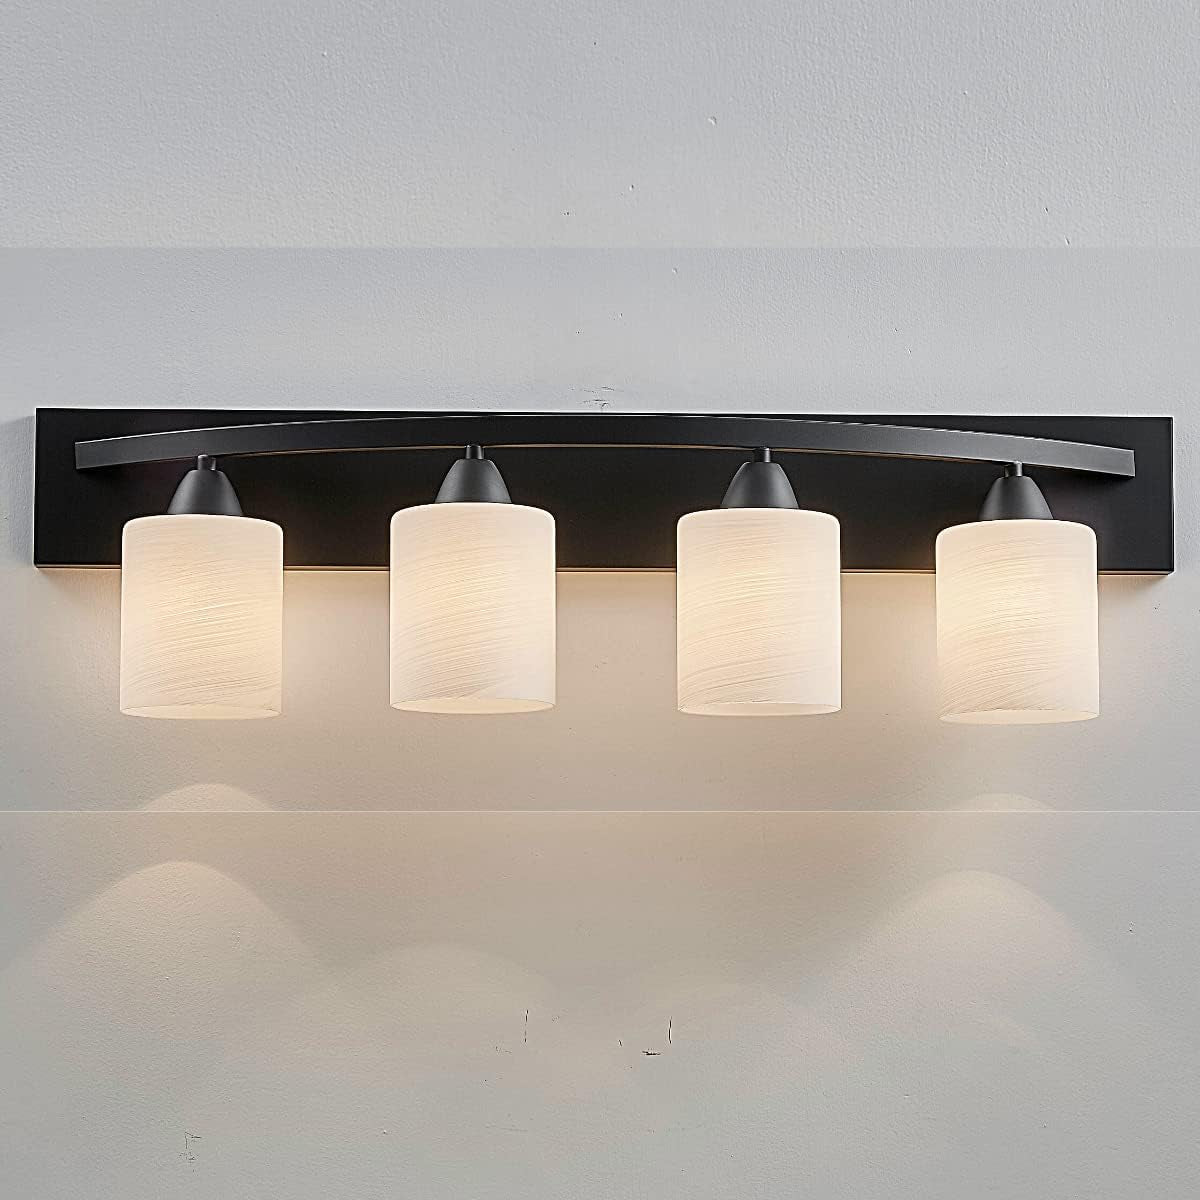 Matte Black Vanity Bath Light Bar - Modern Interior Lighting Fixtures over Mirror - with 4 Lights - Ideal for Bathroom and Make up Vanity Area Lights - Easy to Install - 7 X 32 X 8.5 Inches